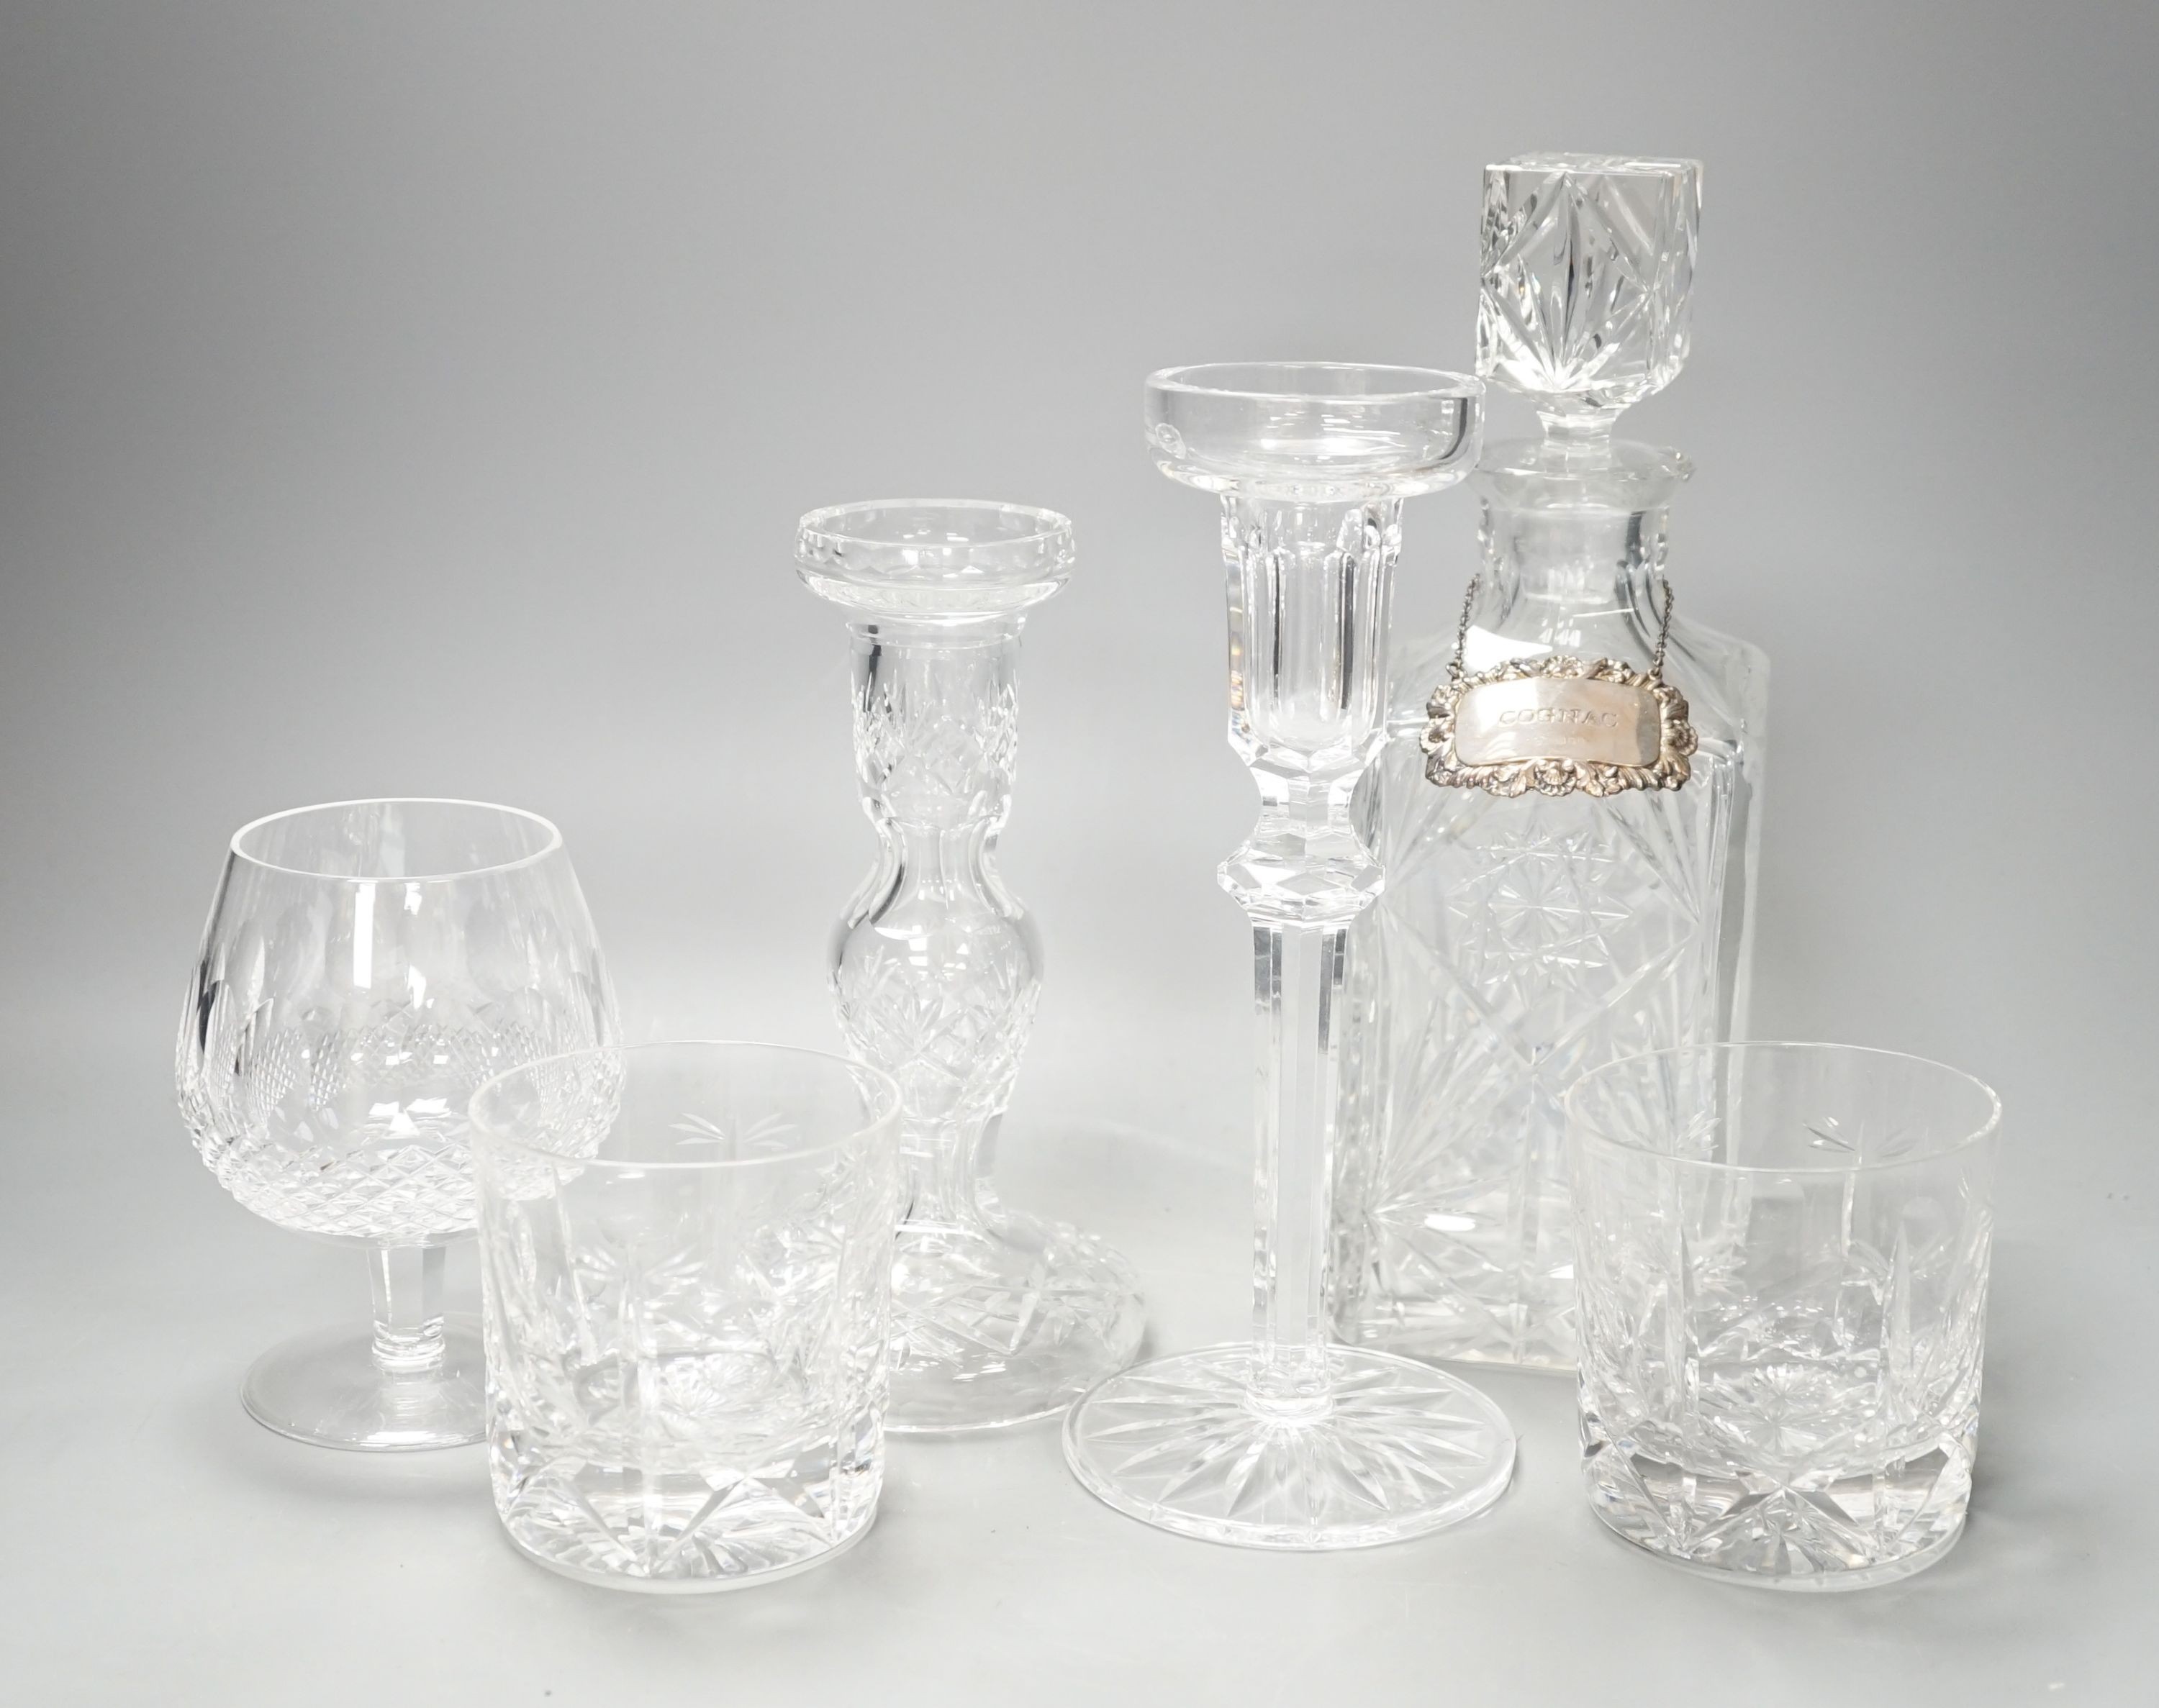 Assorted glassware including six decanters, each with a modern silver wine label